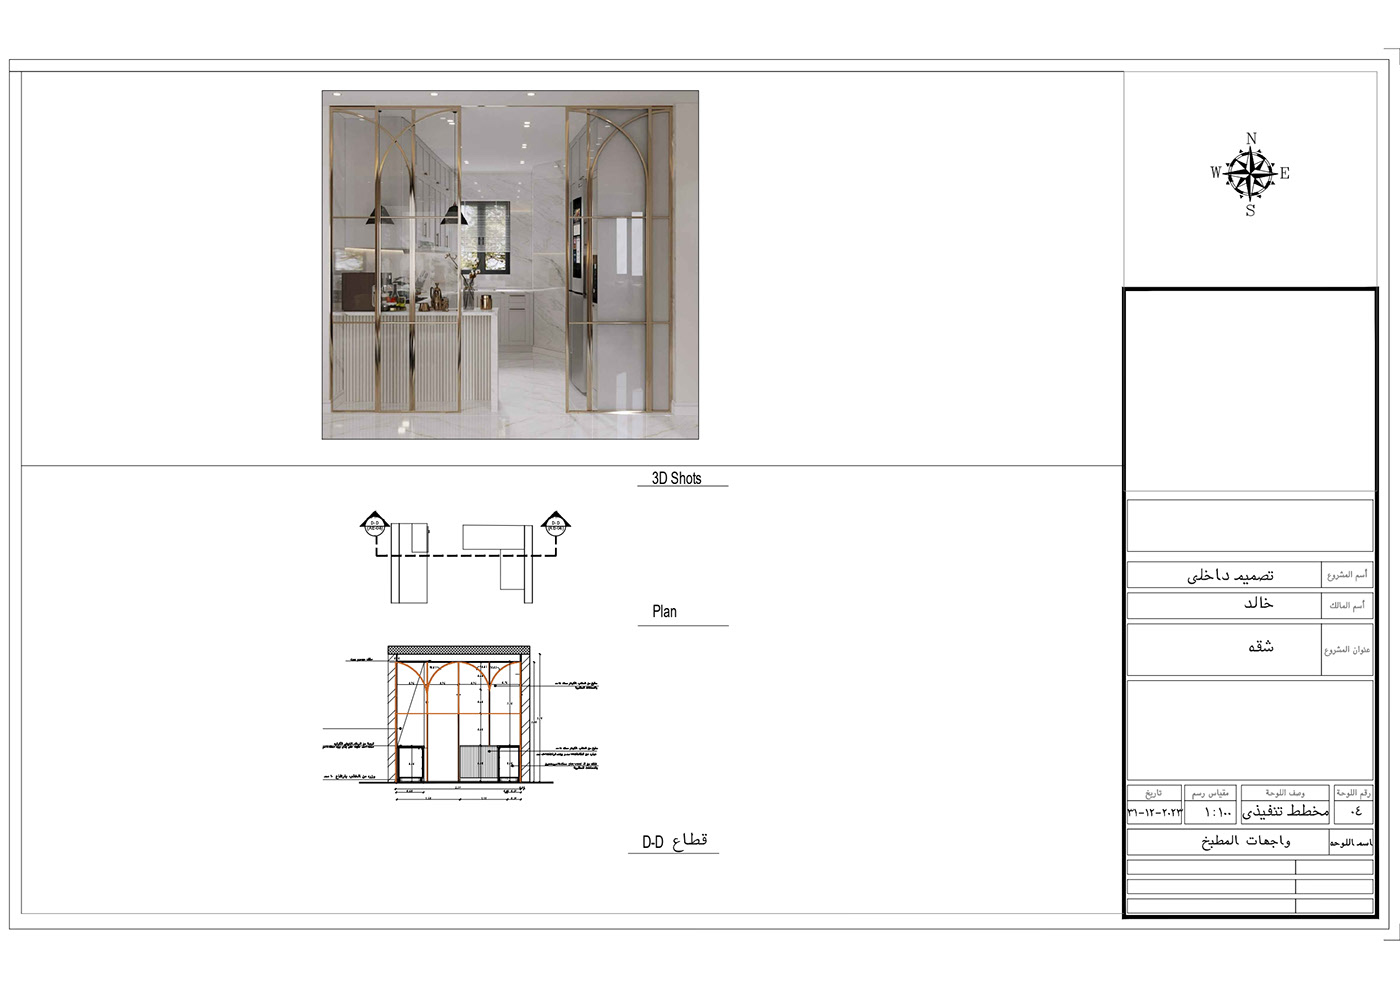 shop drawing technical drawing architectural design architecture interior design  exterior 3ds max